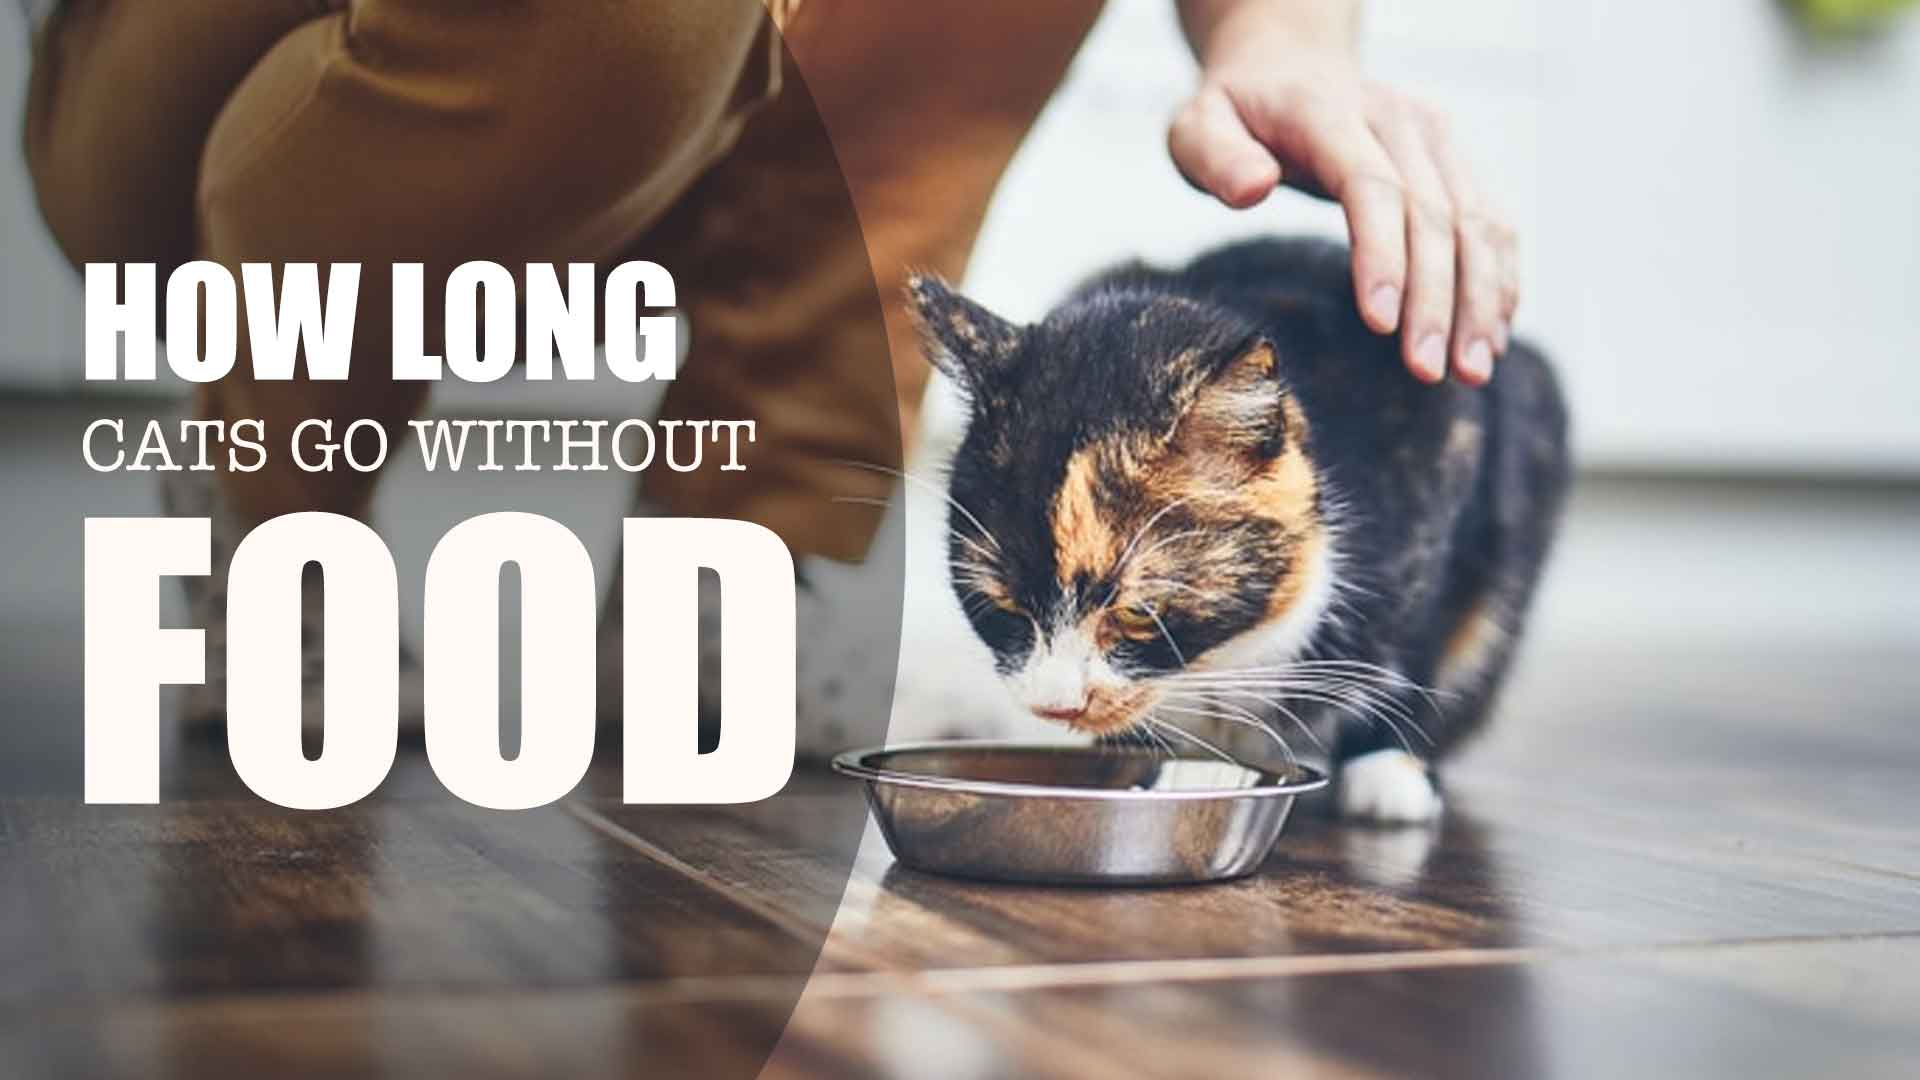 How long can cats go without food